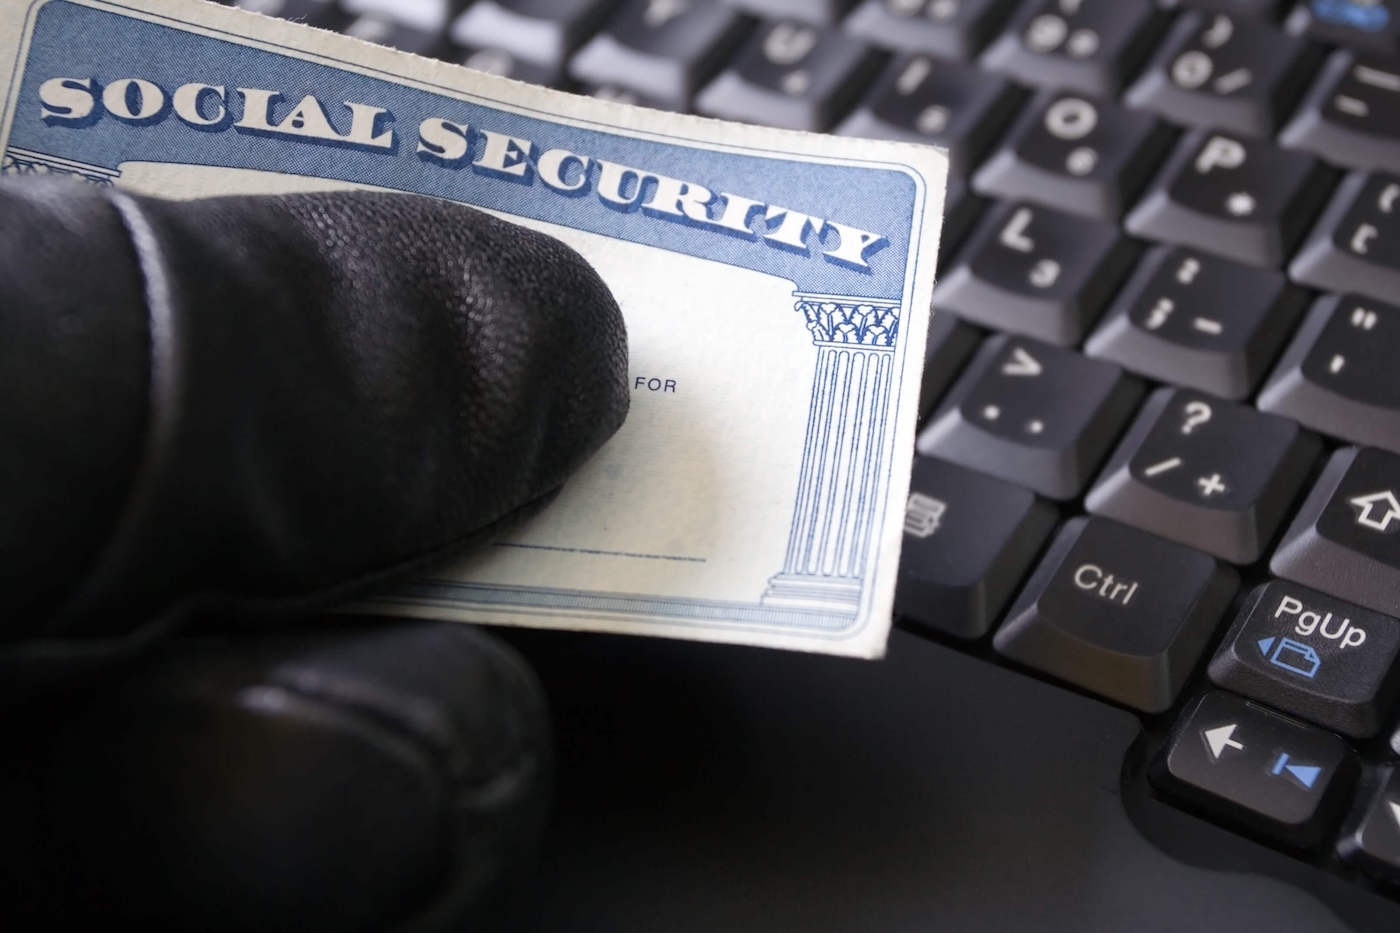 How to Track Social Security Card